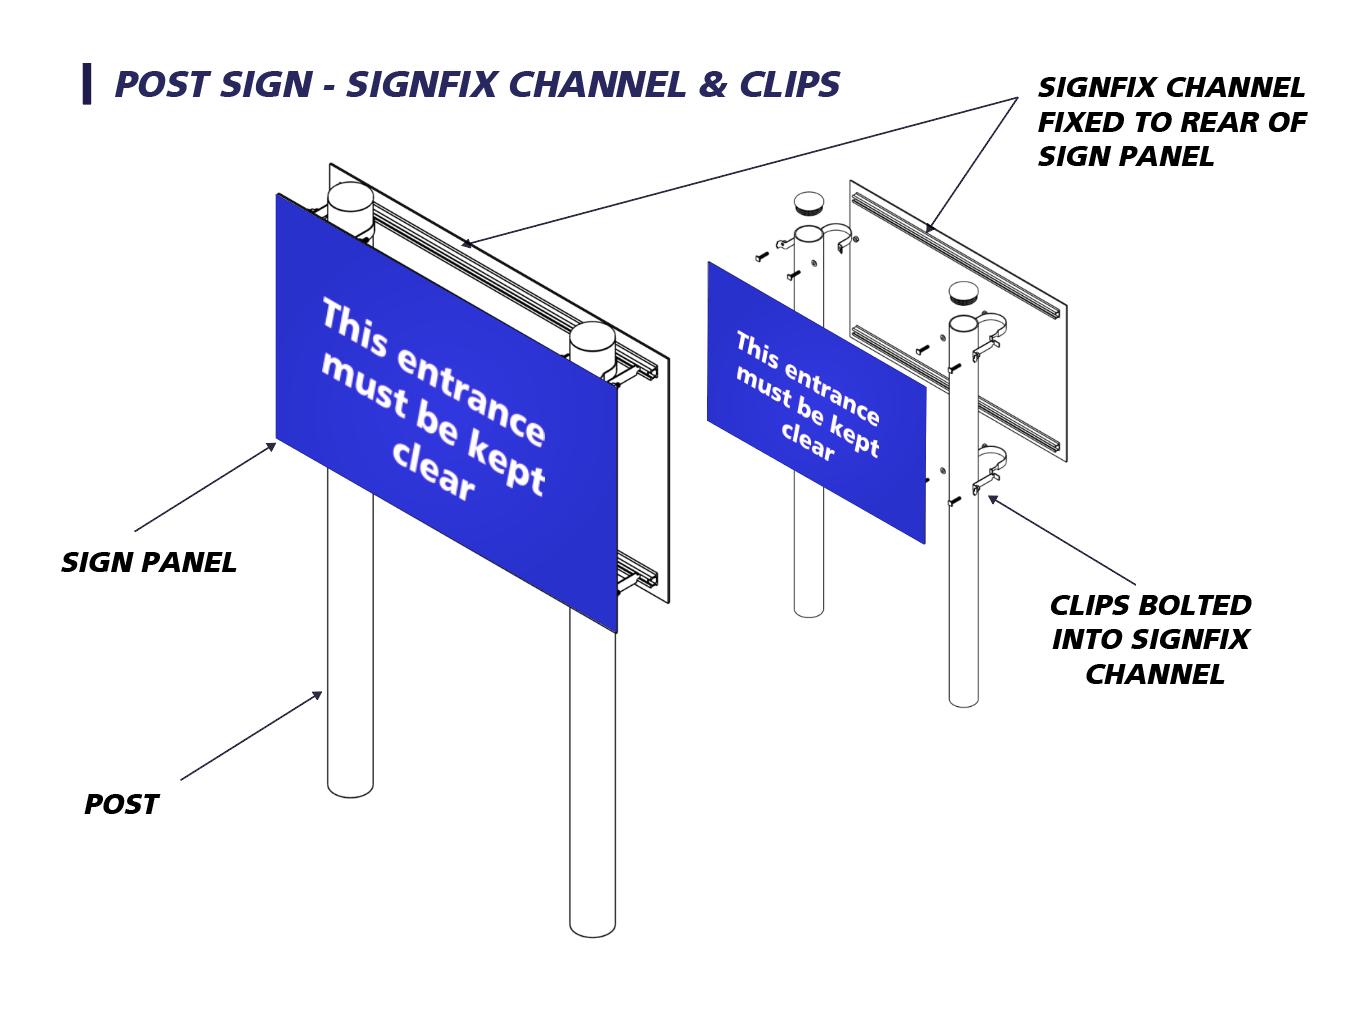 POST SIGN - SIGNFIX CHANNEL & CLIPS